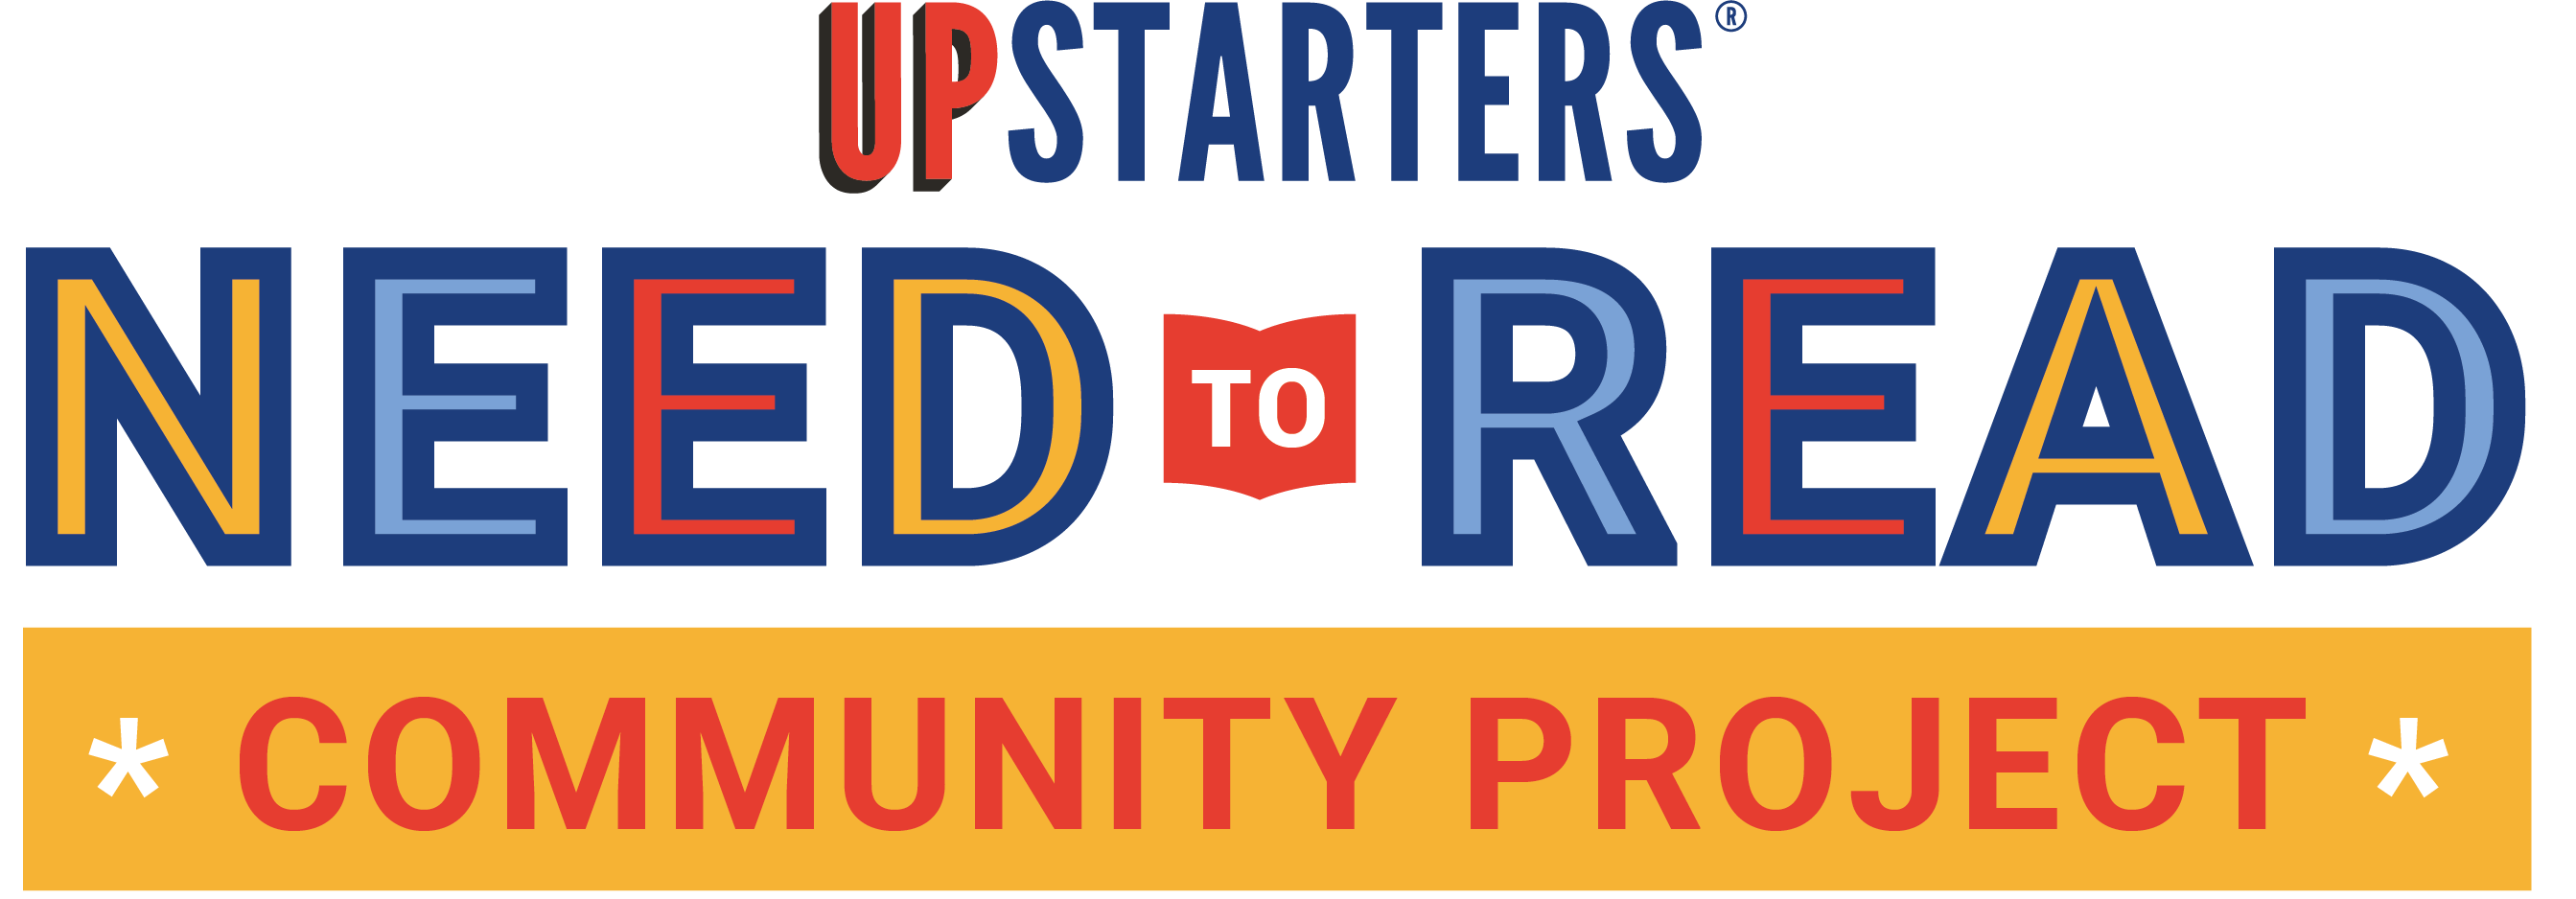 united_way_upstarters_need_to_read_logo.png